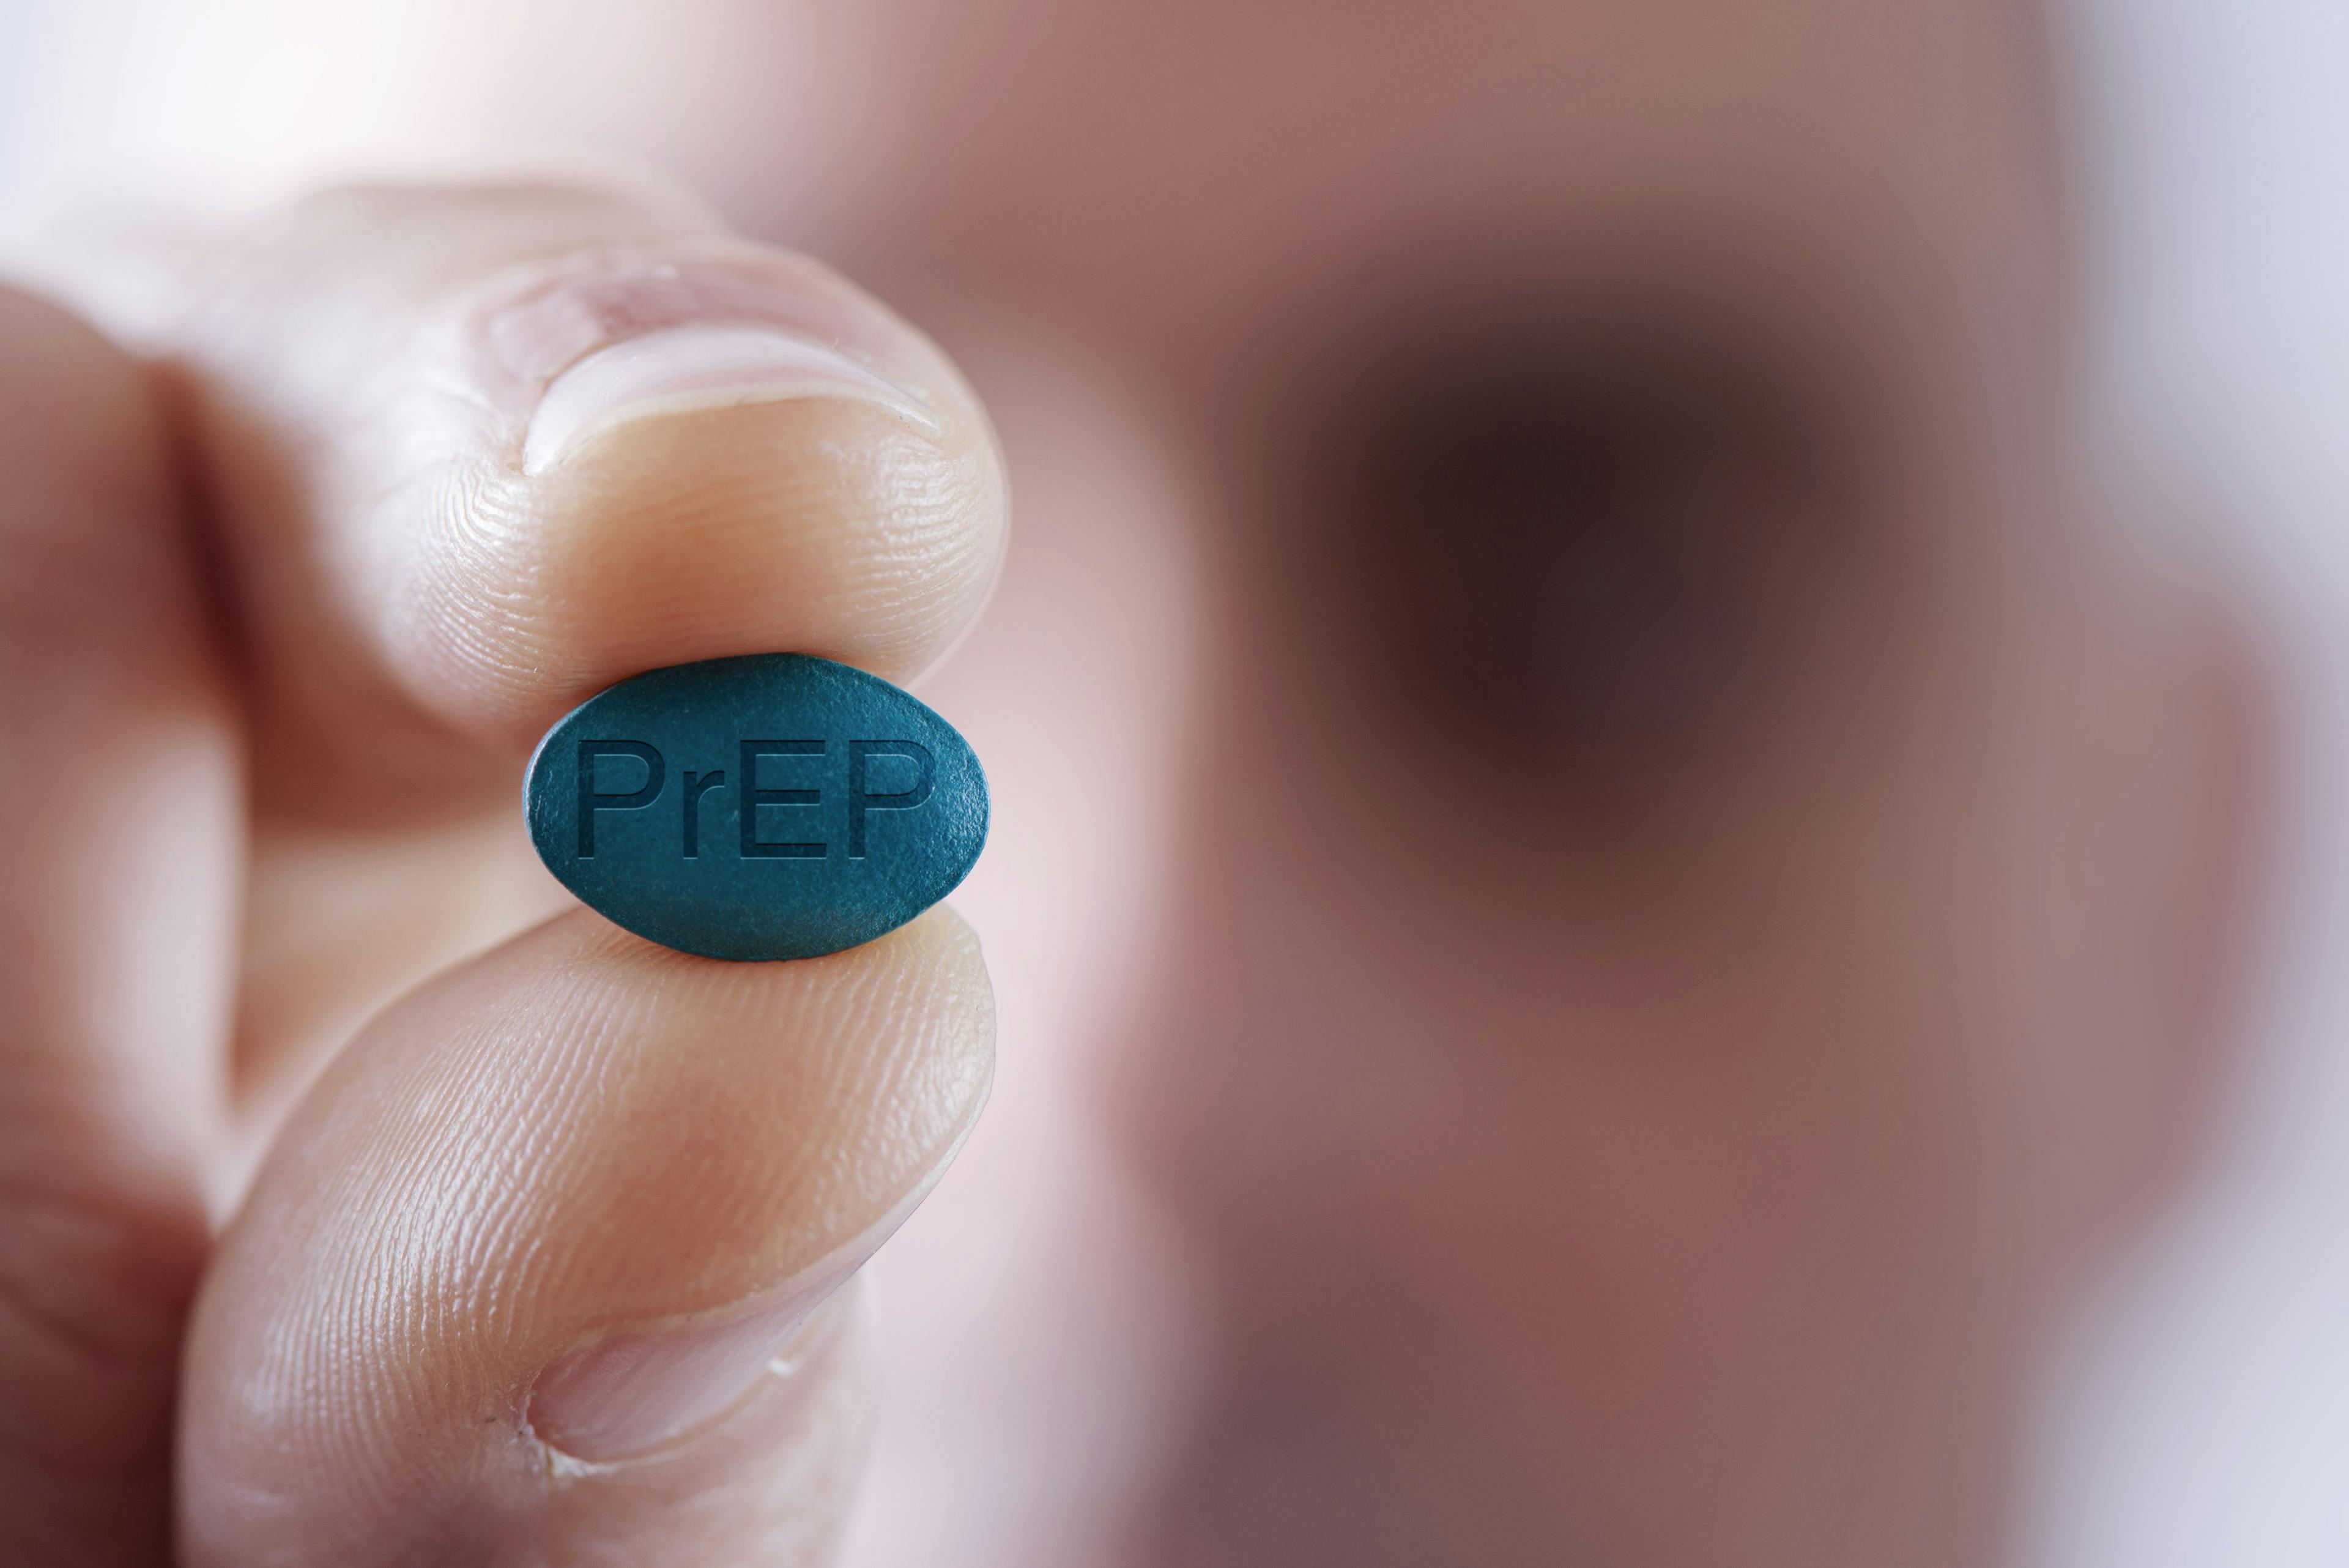 HIV PrEP Awareness Increases Significantly, but Usage Still Lagging